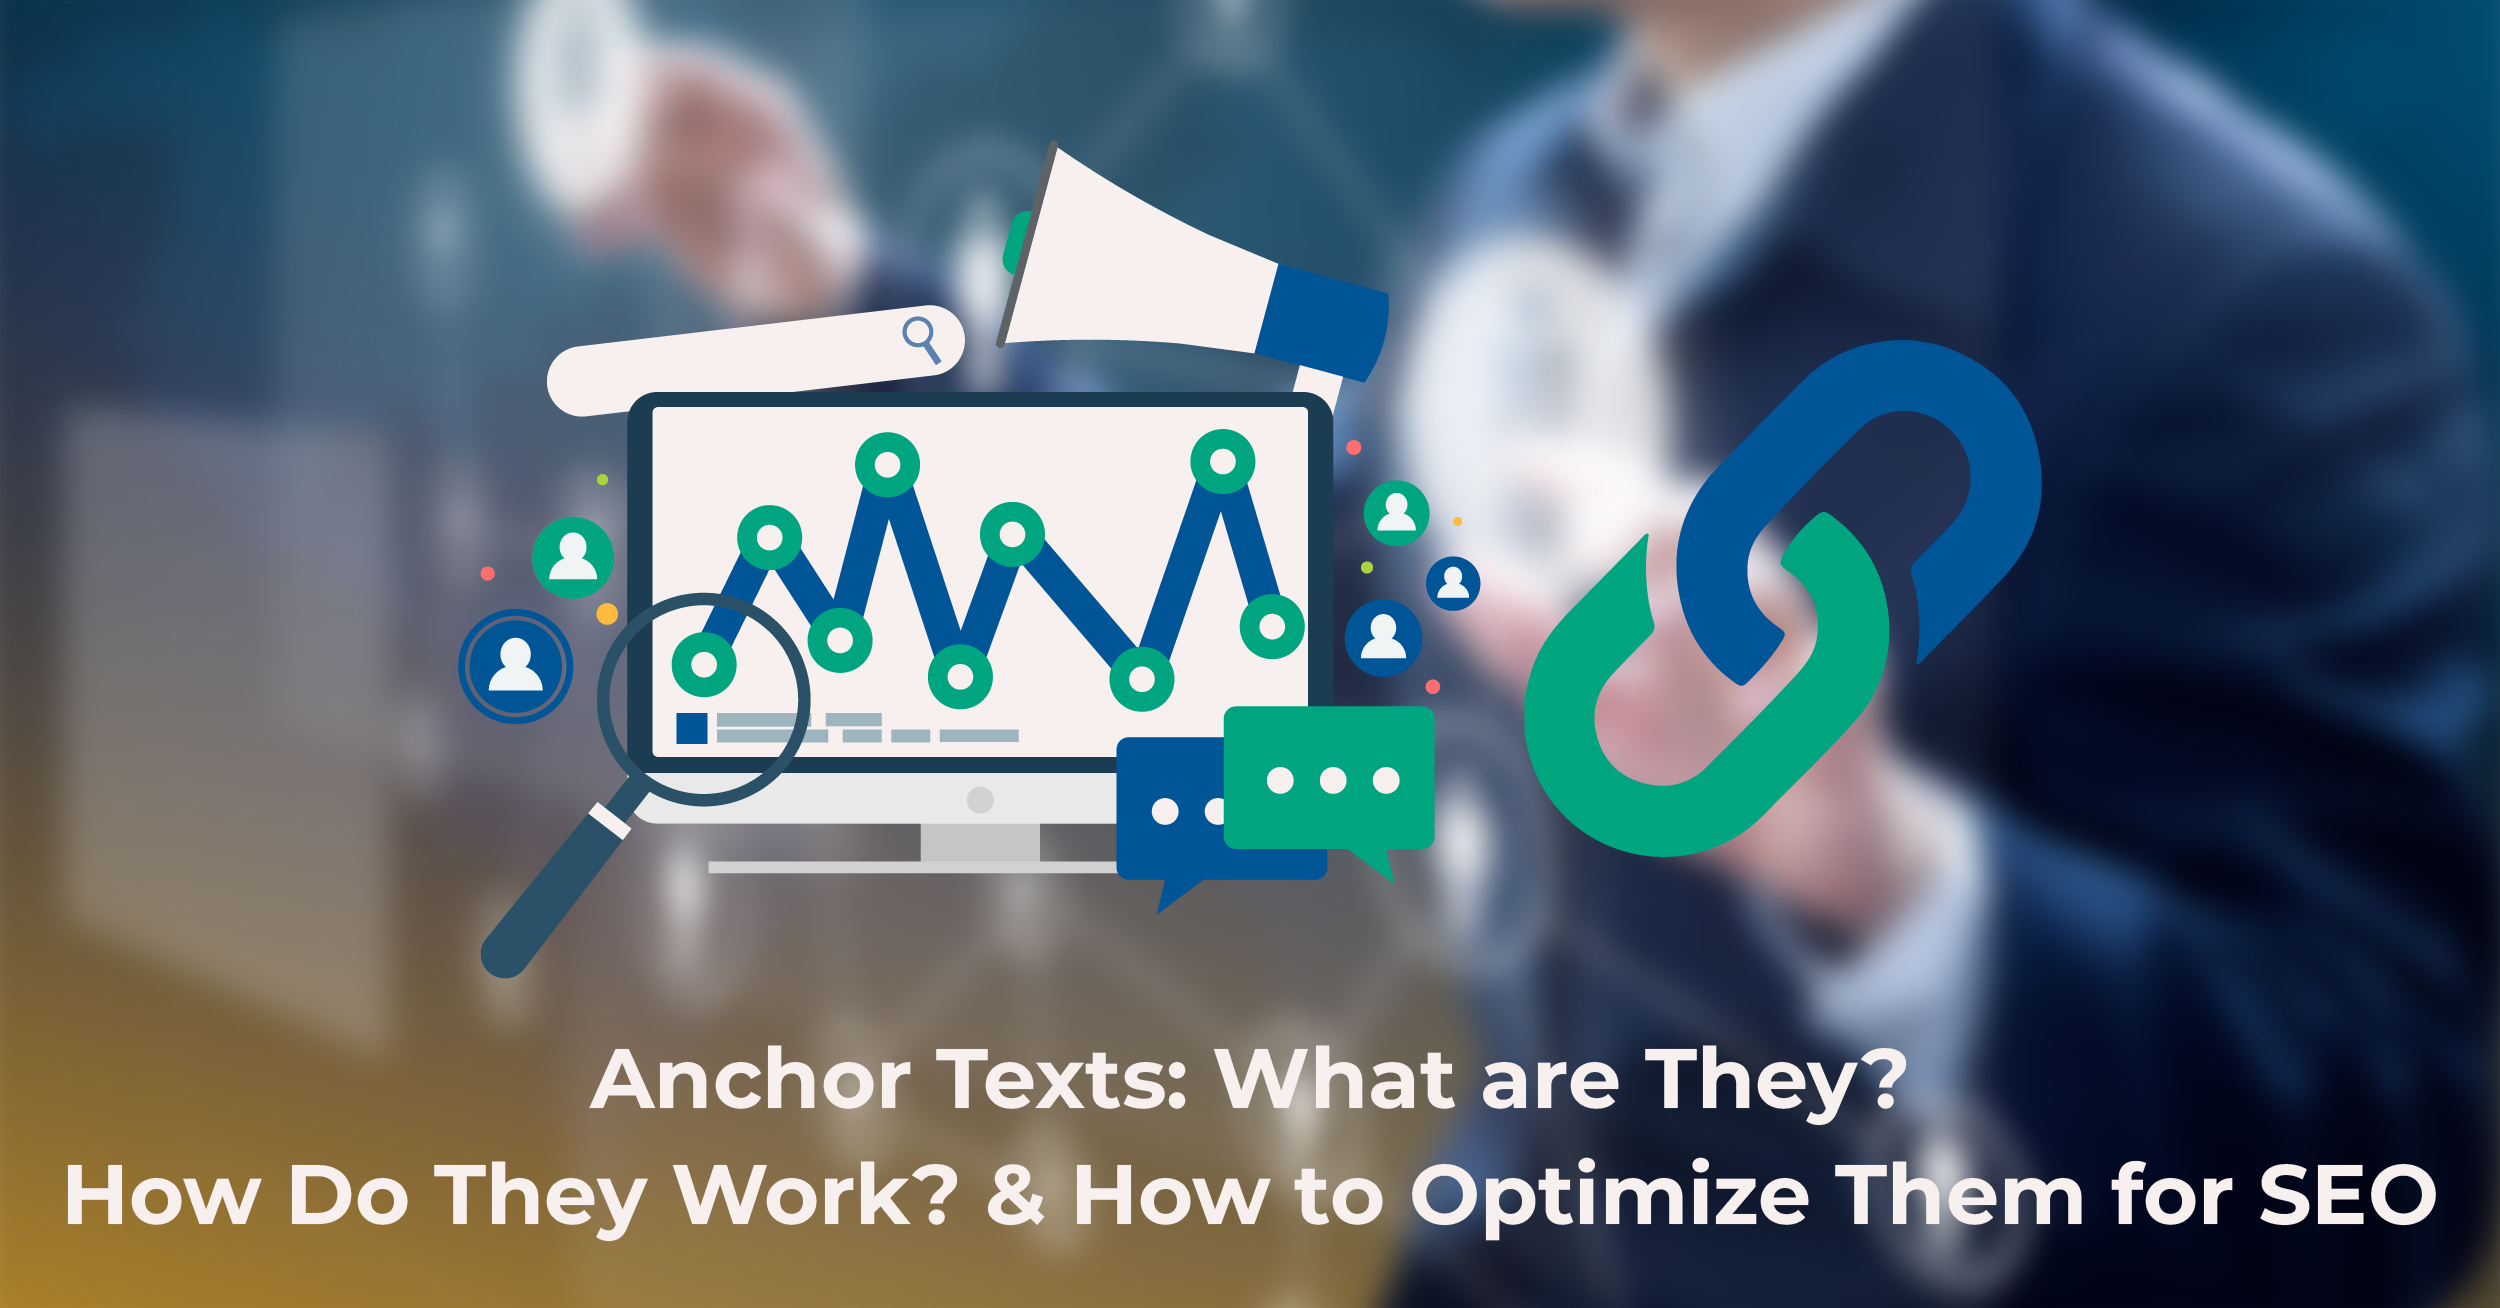 Anchor Texts: What are They? How Do They Work? & How to Optimize Them for SEO